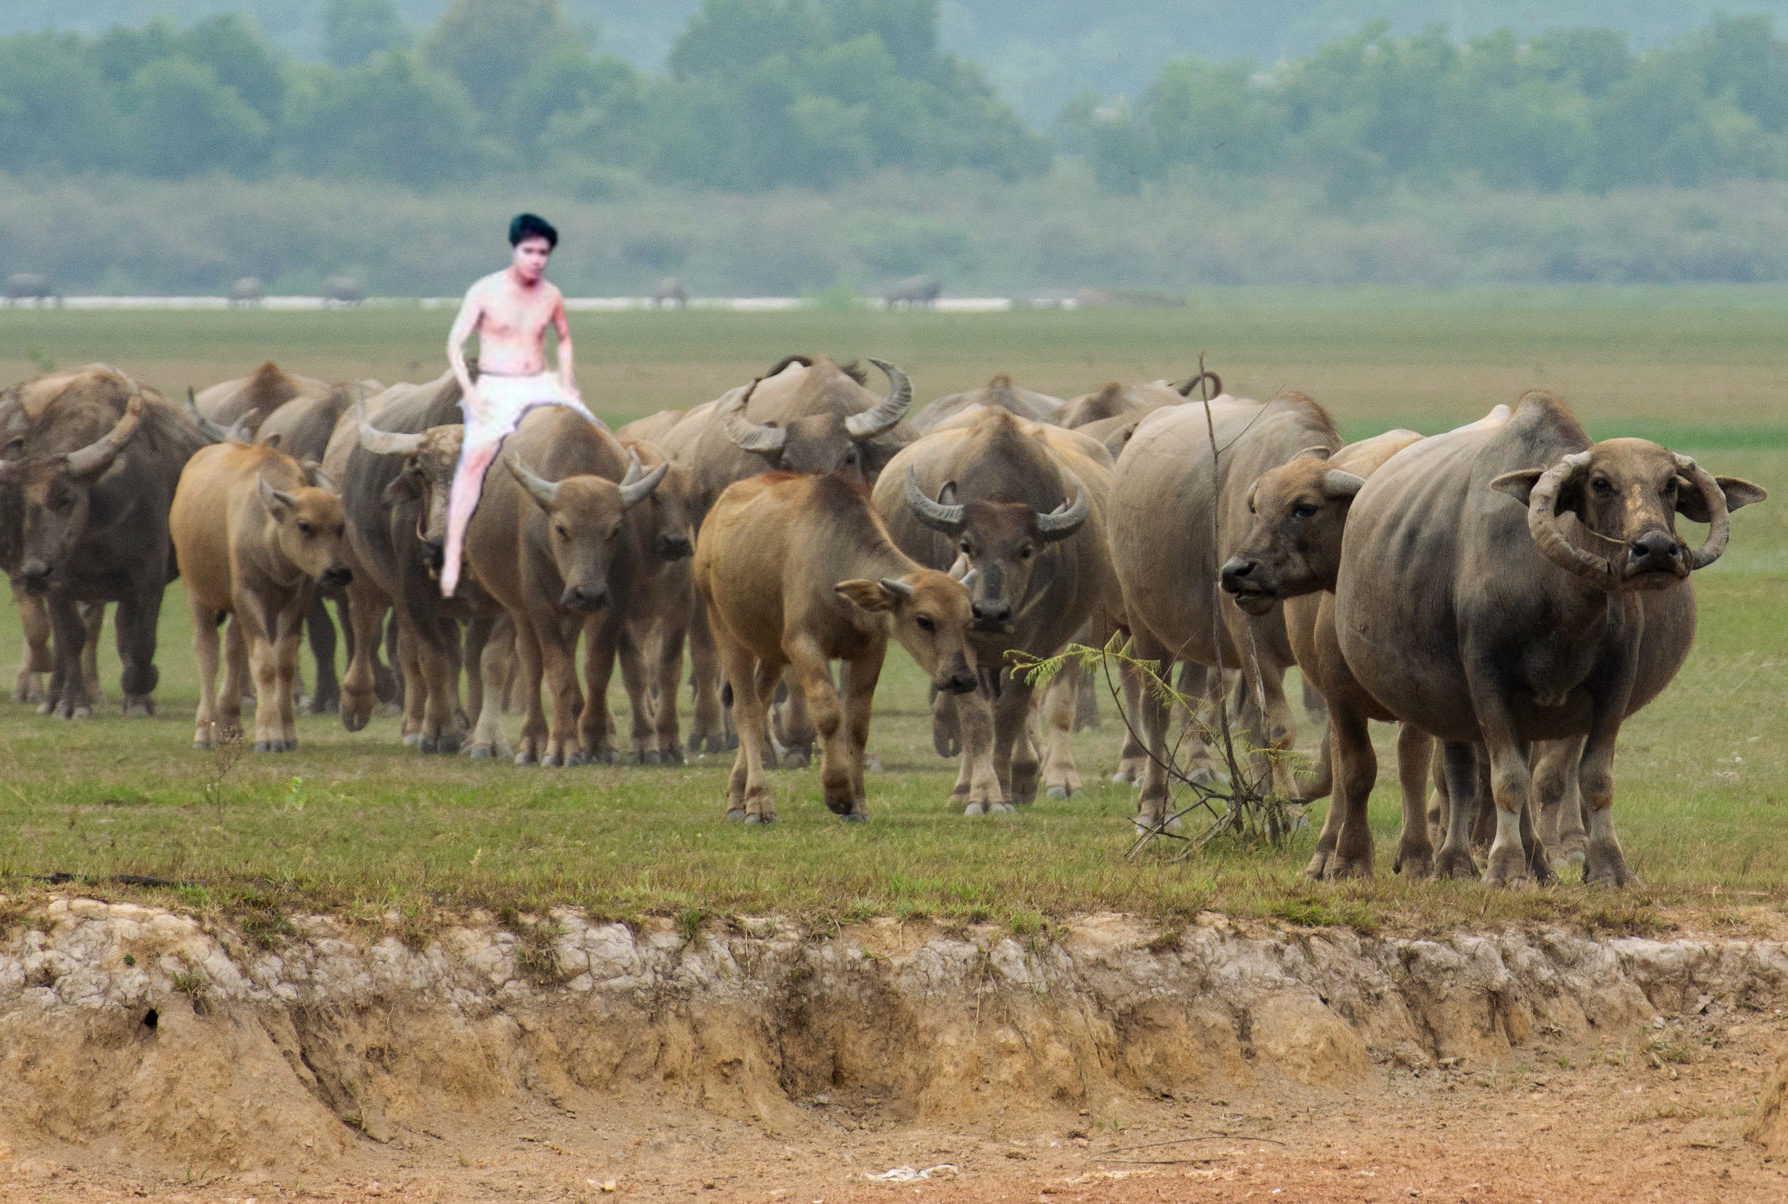 The Thrilling Adventures of Farm Life: Riding Buffaloes and Cows